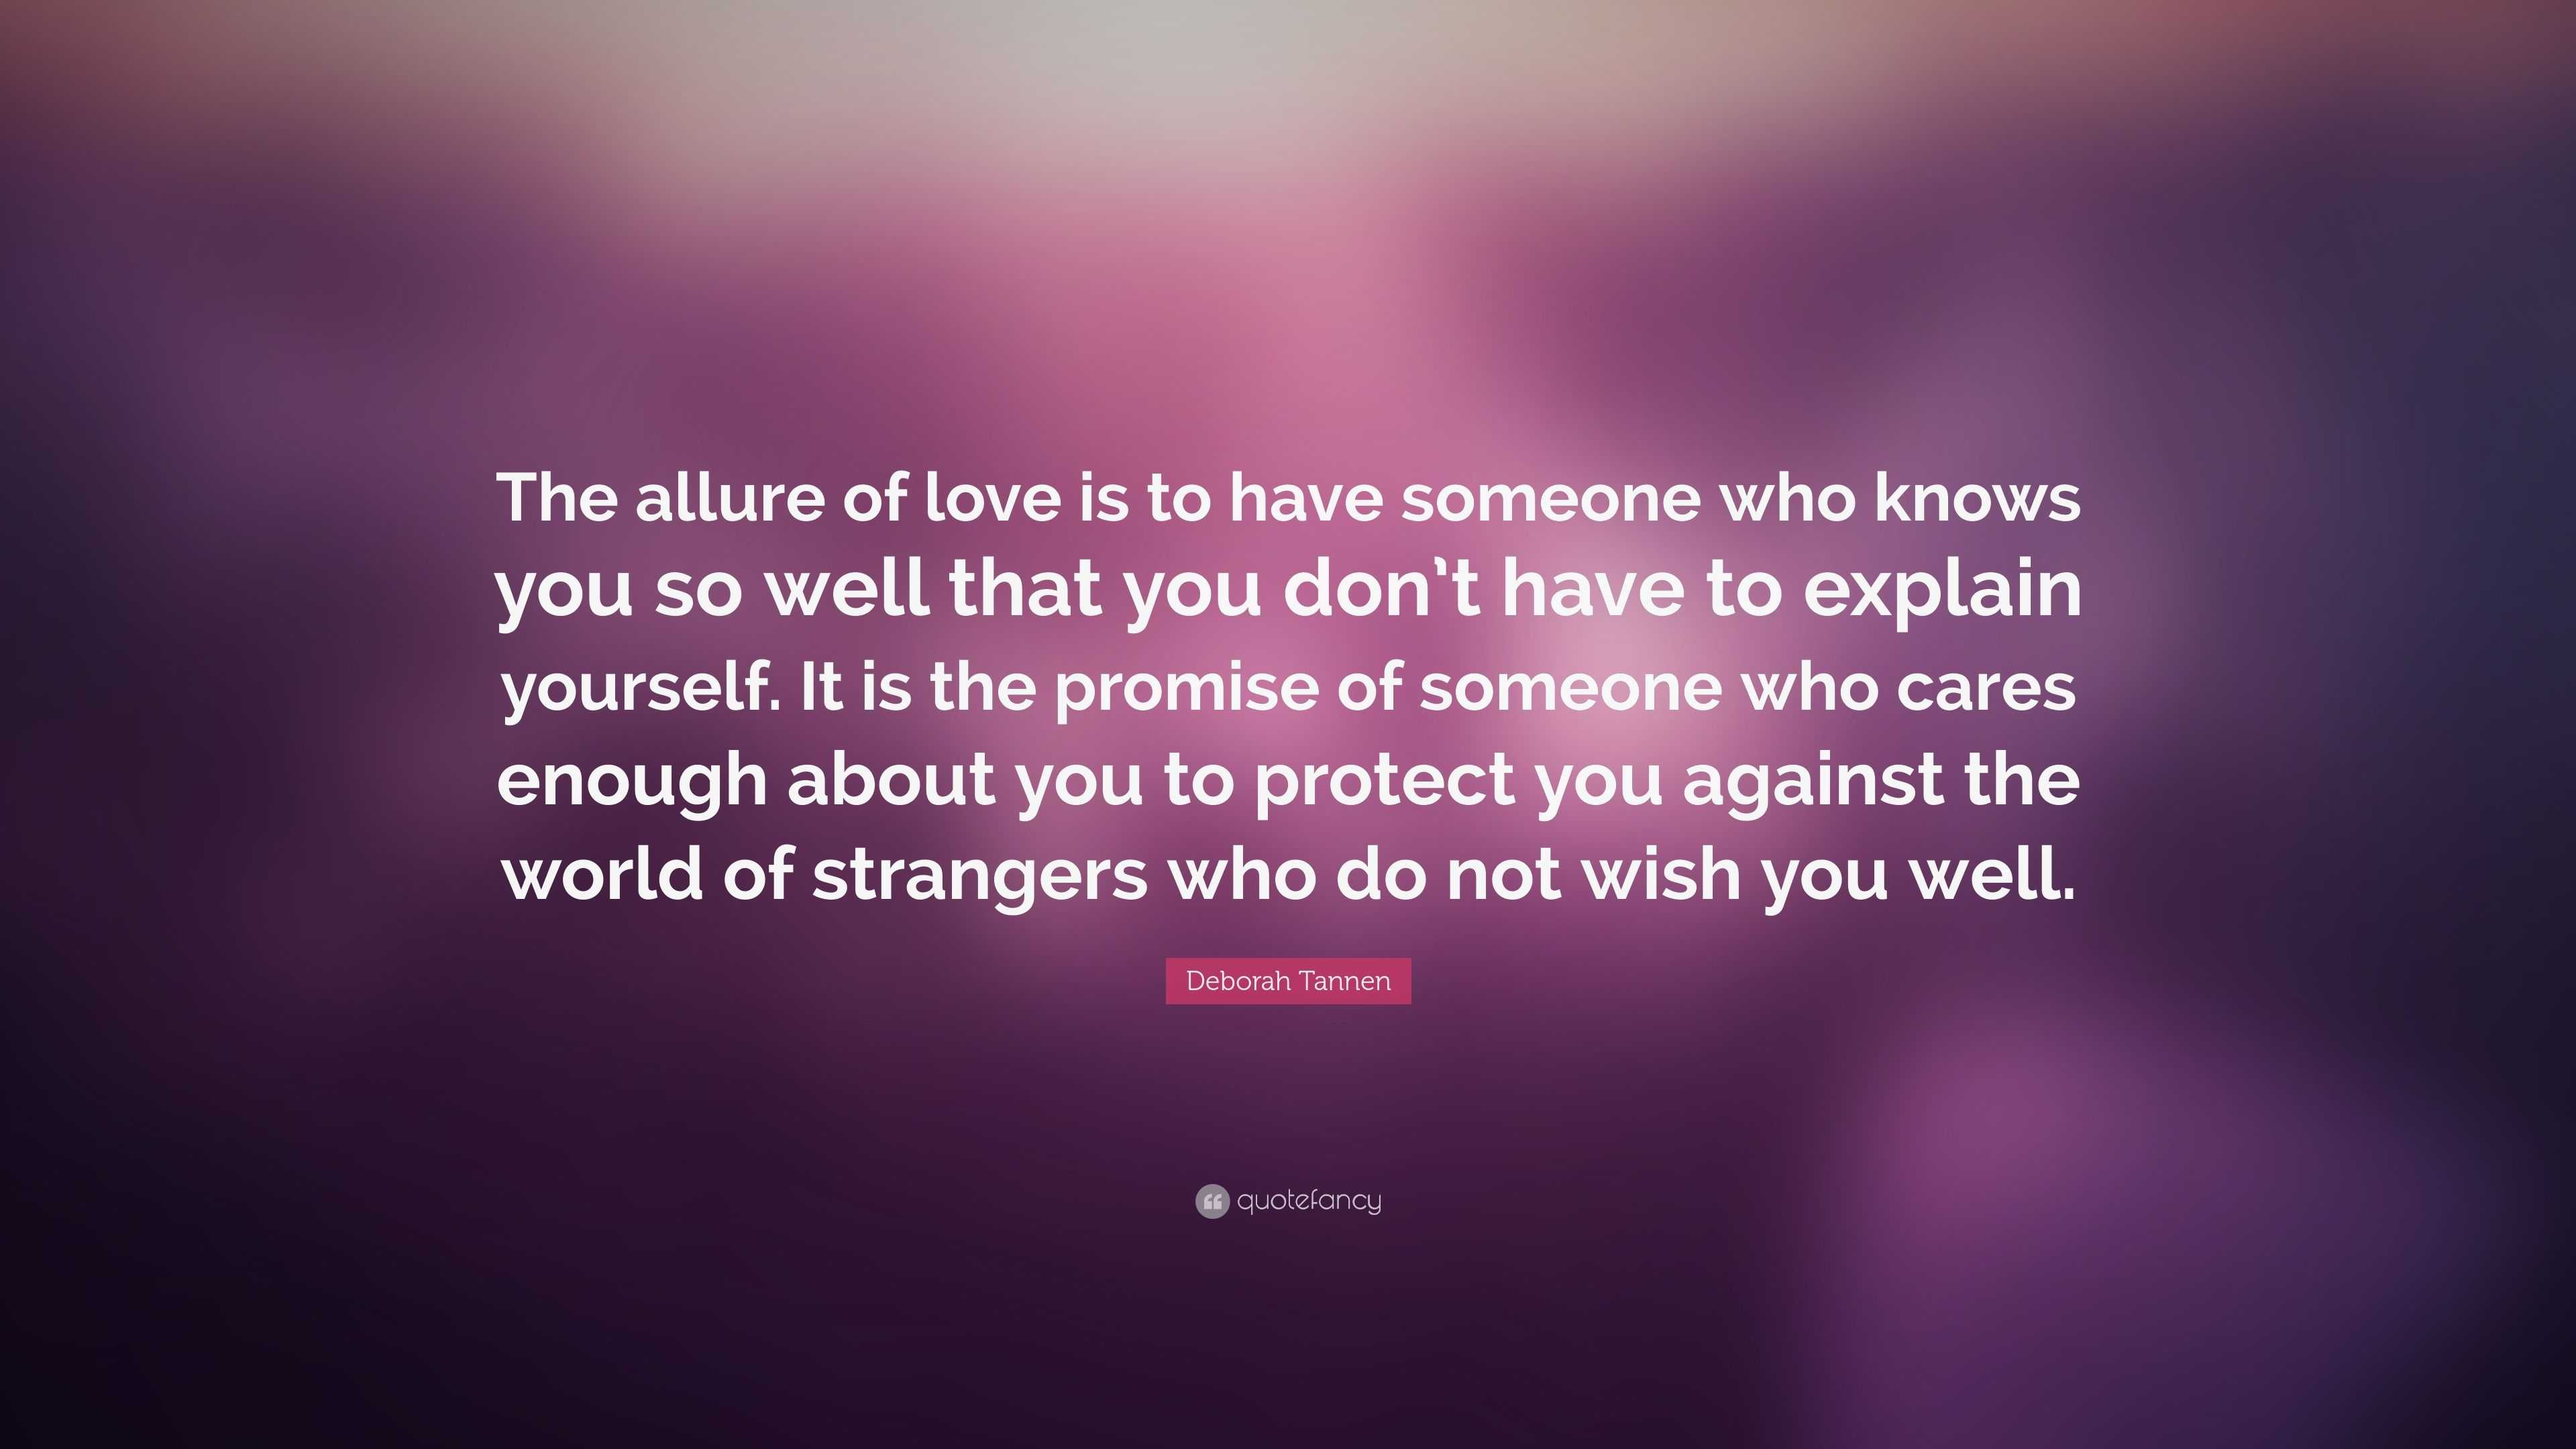 Deborah Tannen Quote “the Allure Of Love Is To Have Someone Who Knows You So Well That You Don